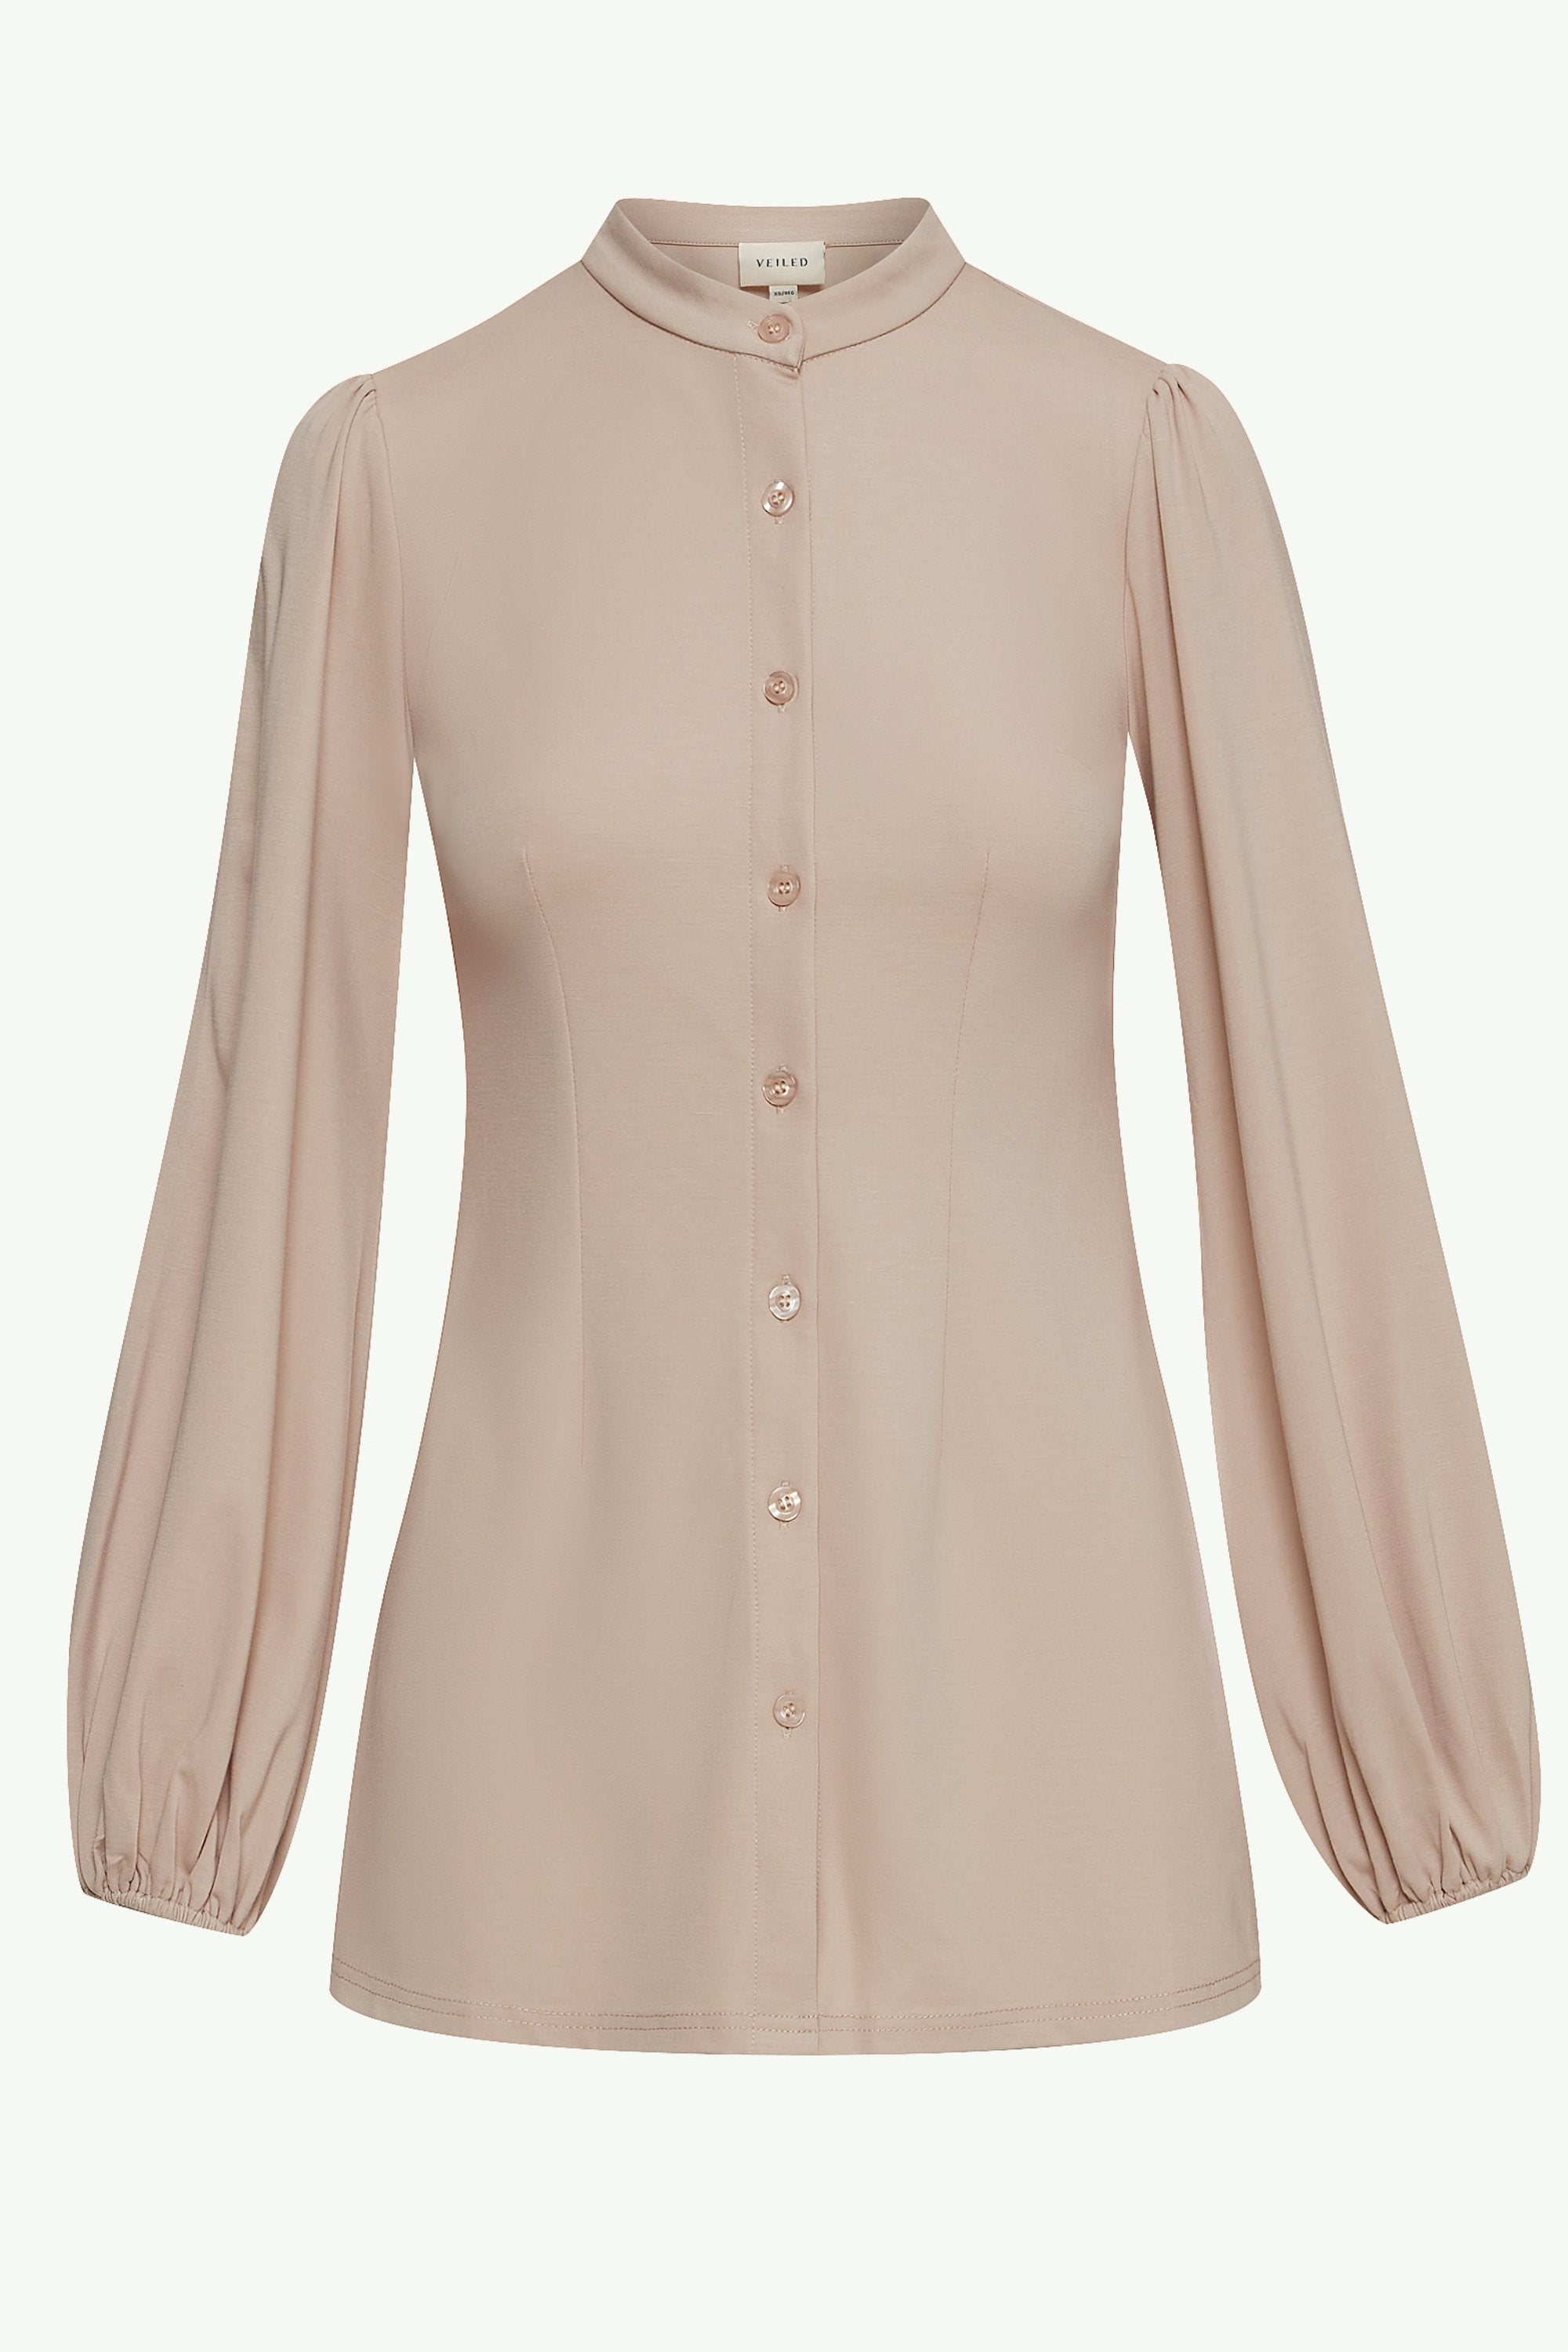 Rayana Jersey Button Down Top - Stone Clothing Veiled 